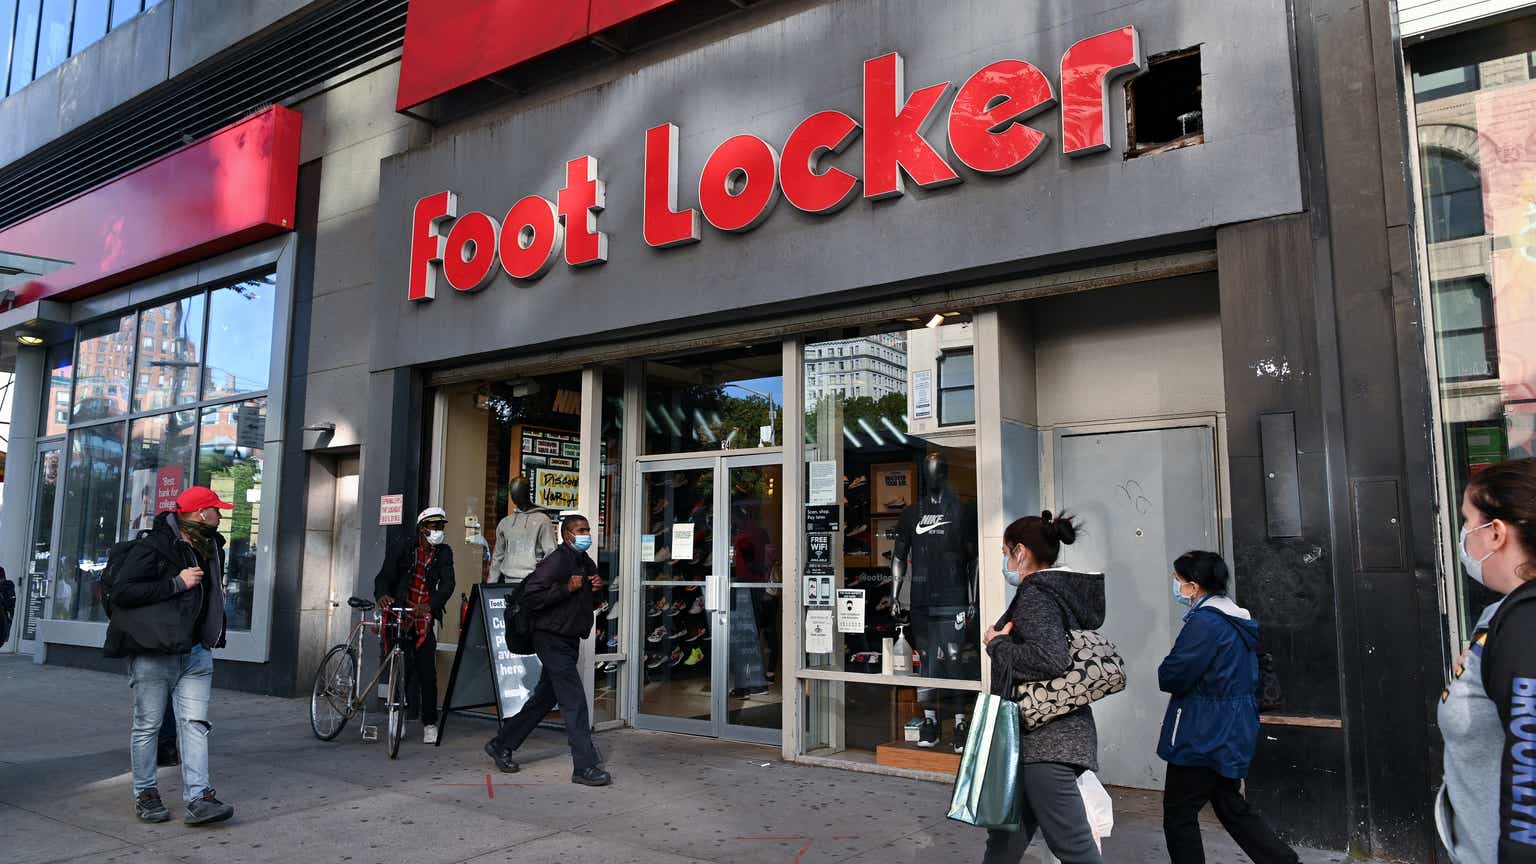 Foot Locker (FL): I Just Don't Understand Why They Exist